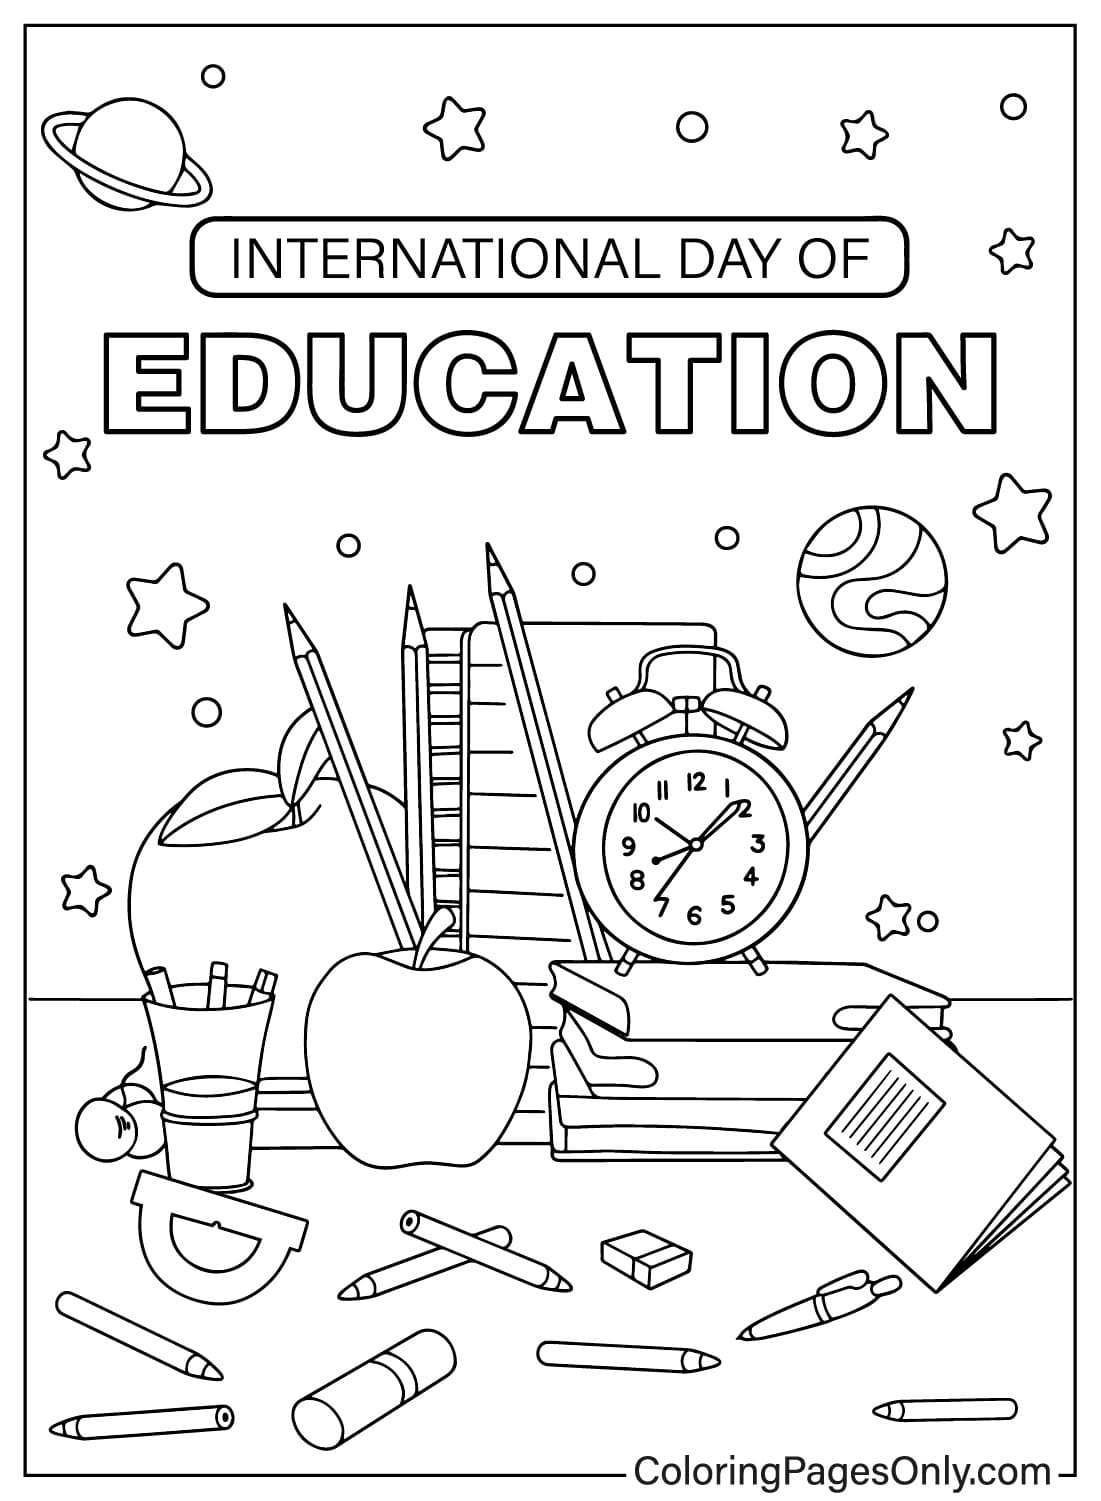 Free International Day of Education Coloring Page from International Day of Education